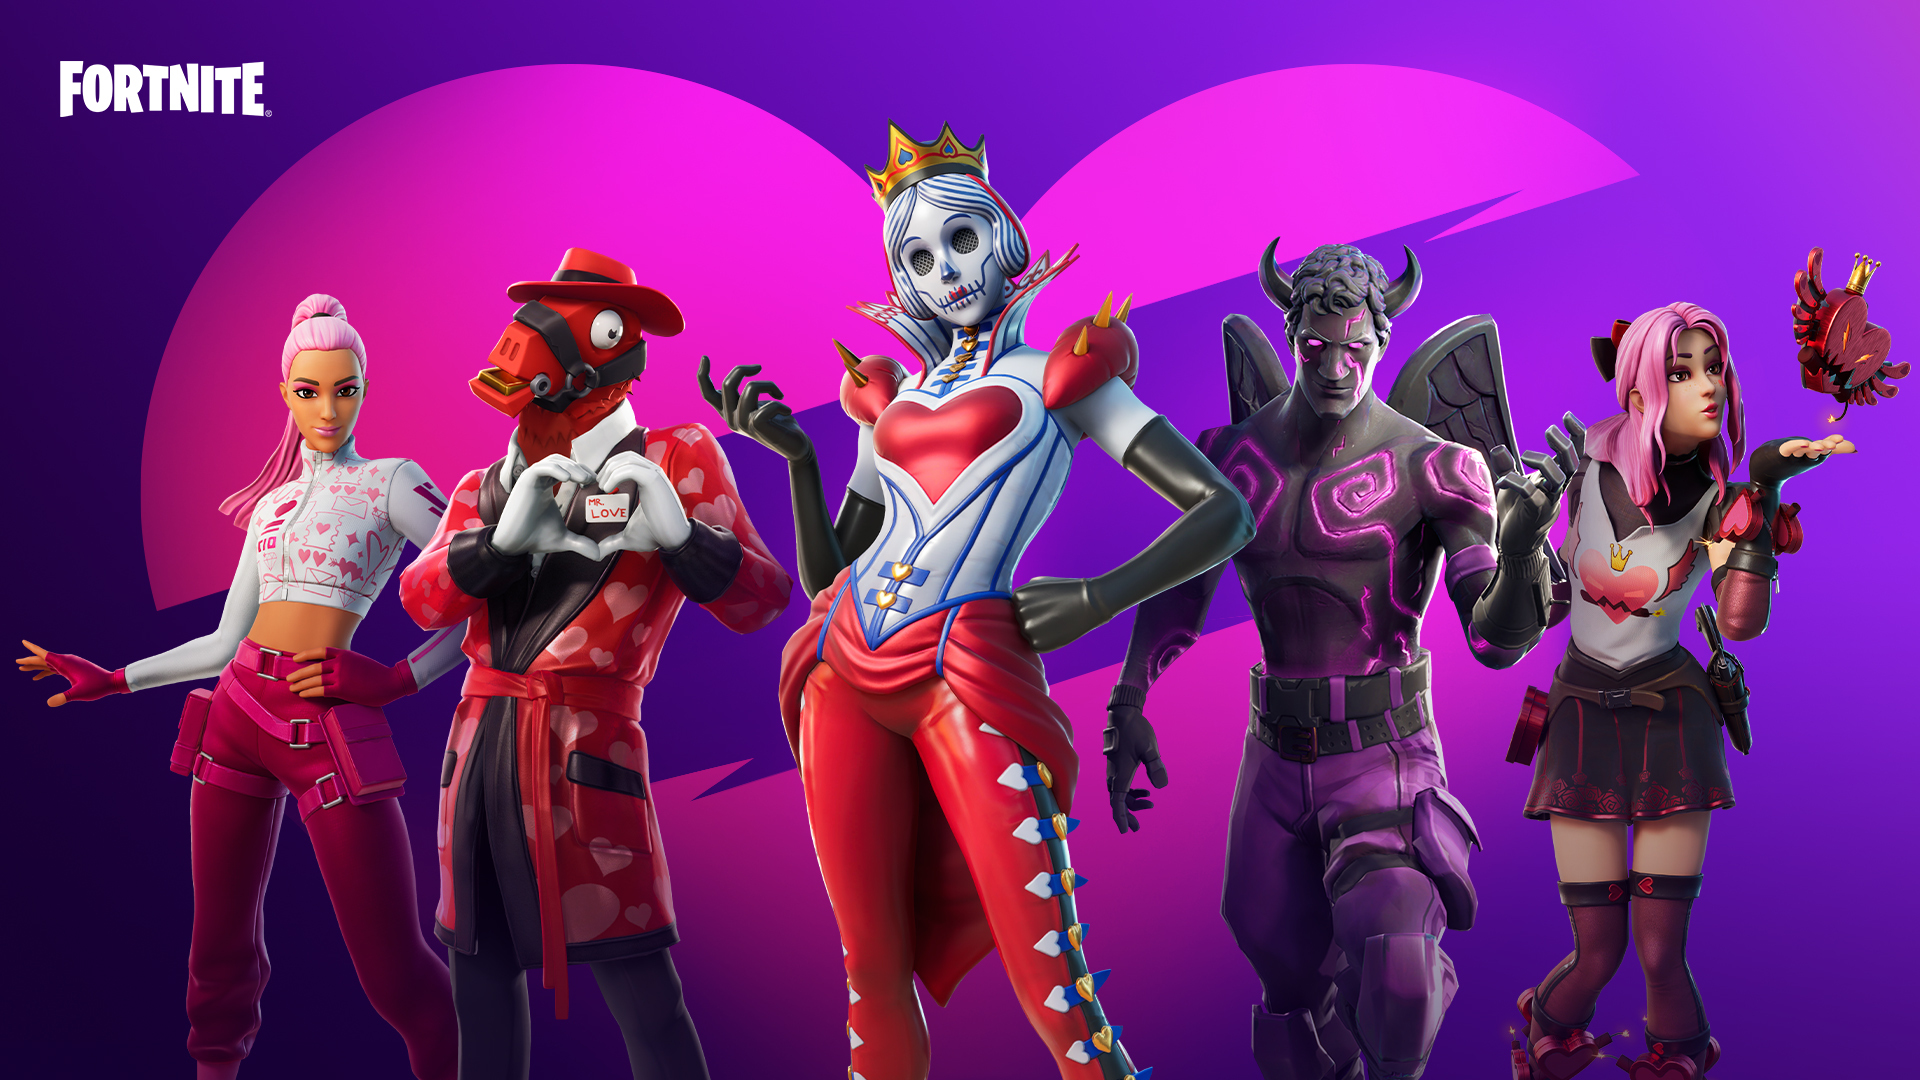 Best Fortnite Wallpapers - HD, iPhone, & Mobile Versions! - Pro Game Guides